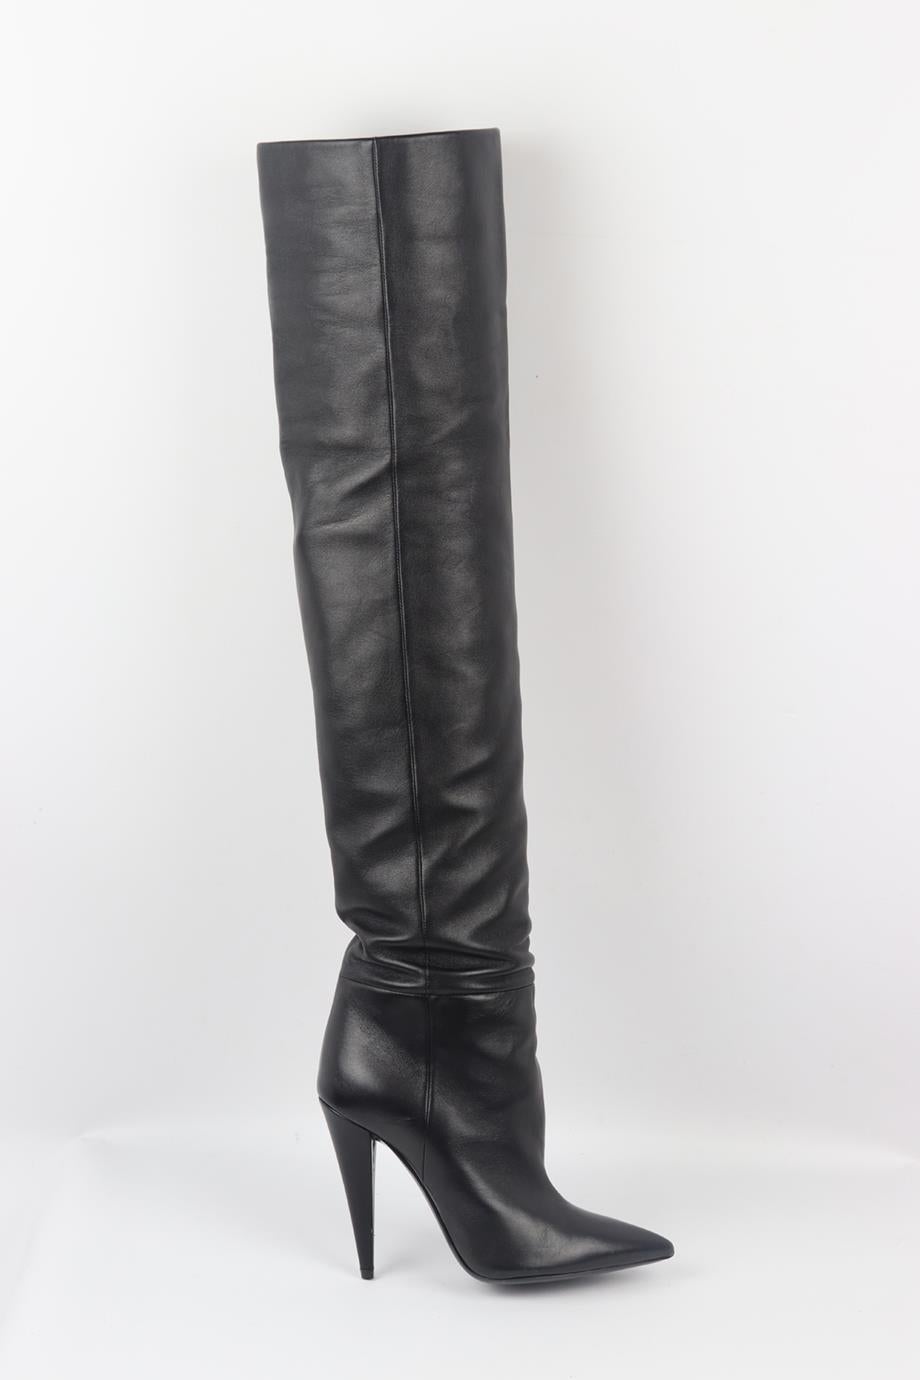 Saint Laurent leather over the knee boots. Black. Pull on. Does not come with dustbag or box. Size: EU 38 (UK 5, US 8). Outersole: 9.5 in. Heel Height: 3.9 in. Shaft: 23.2 in. Thigh: 15.8 in. Very good condition - Worn once. Light wear to soles.